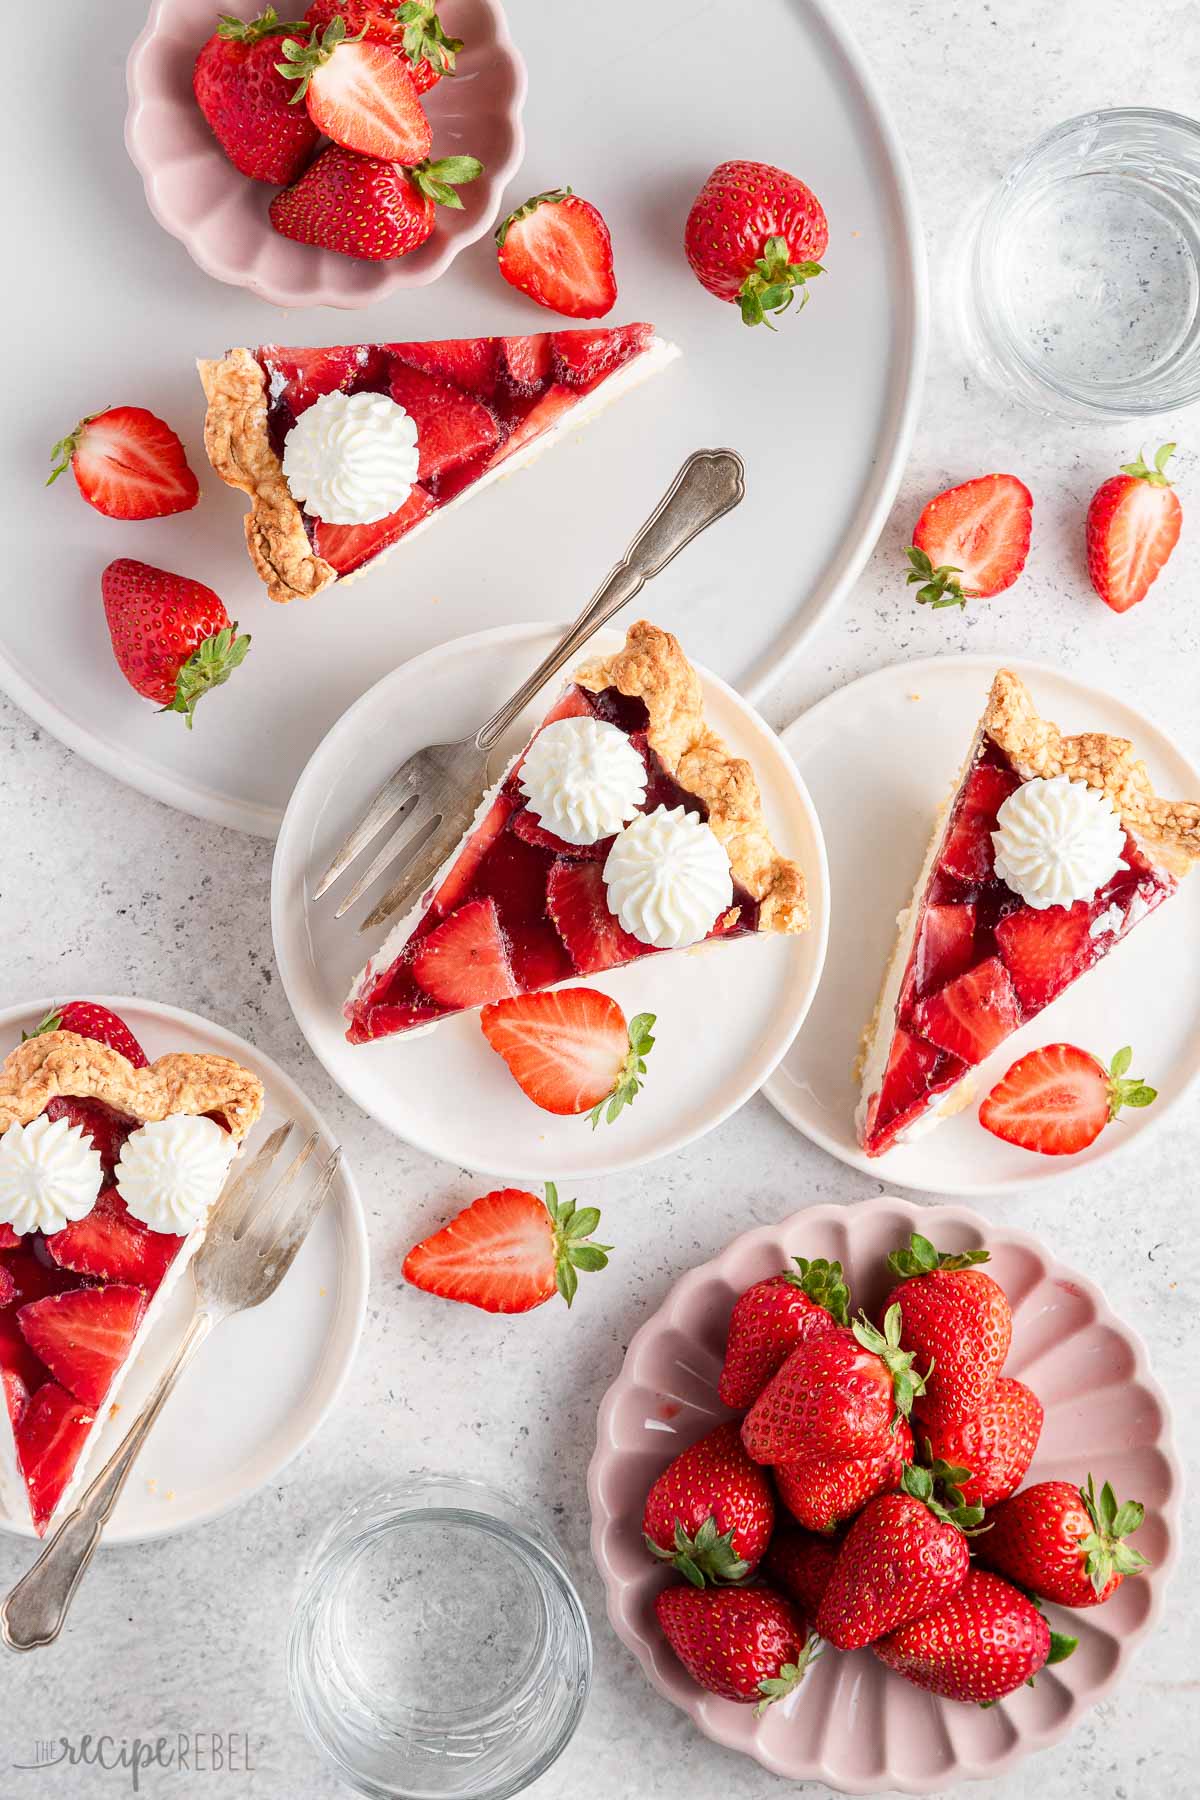 several pieces of strawberry pie on white plates with strawberries all around.